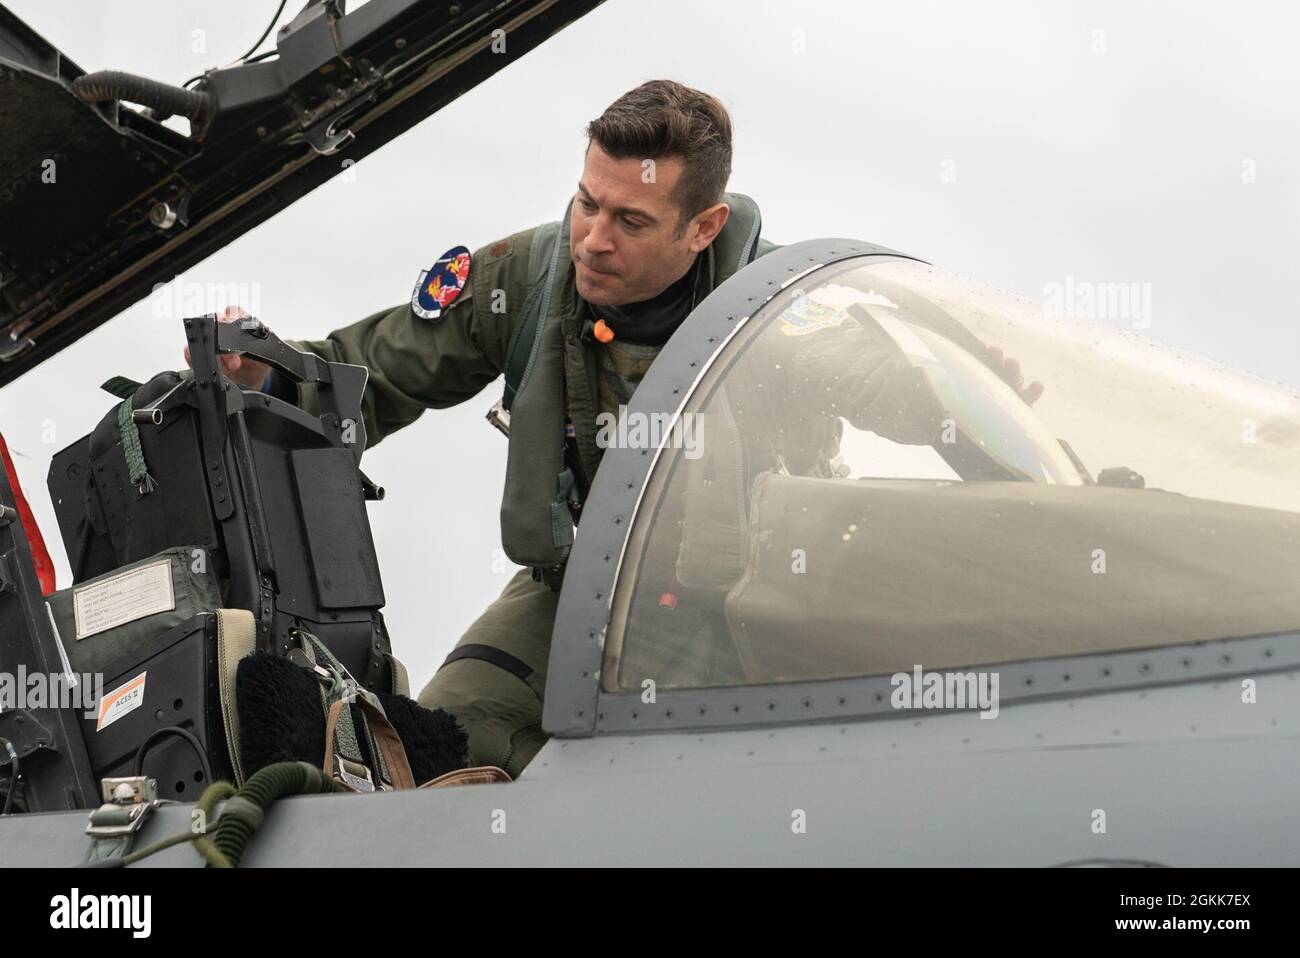 A U.S. Air Force pilot assigned to the 492nd Fighter Squadron climbs into the cockpit of an F-15E Strike Eagle during surge operations at Royal Air Force Lakenheath, England, May 13, 2021. Surge operations are designed to simulate a fast-paced, deployed combat environment to ensure aircrew and support personnel are always ready to execute missions in defense of the United States and its allies. Stock Photo